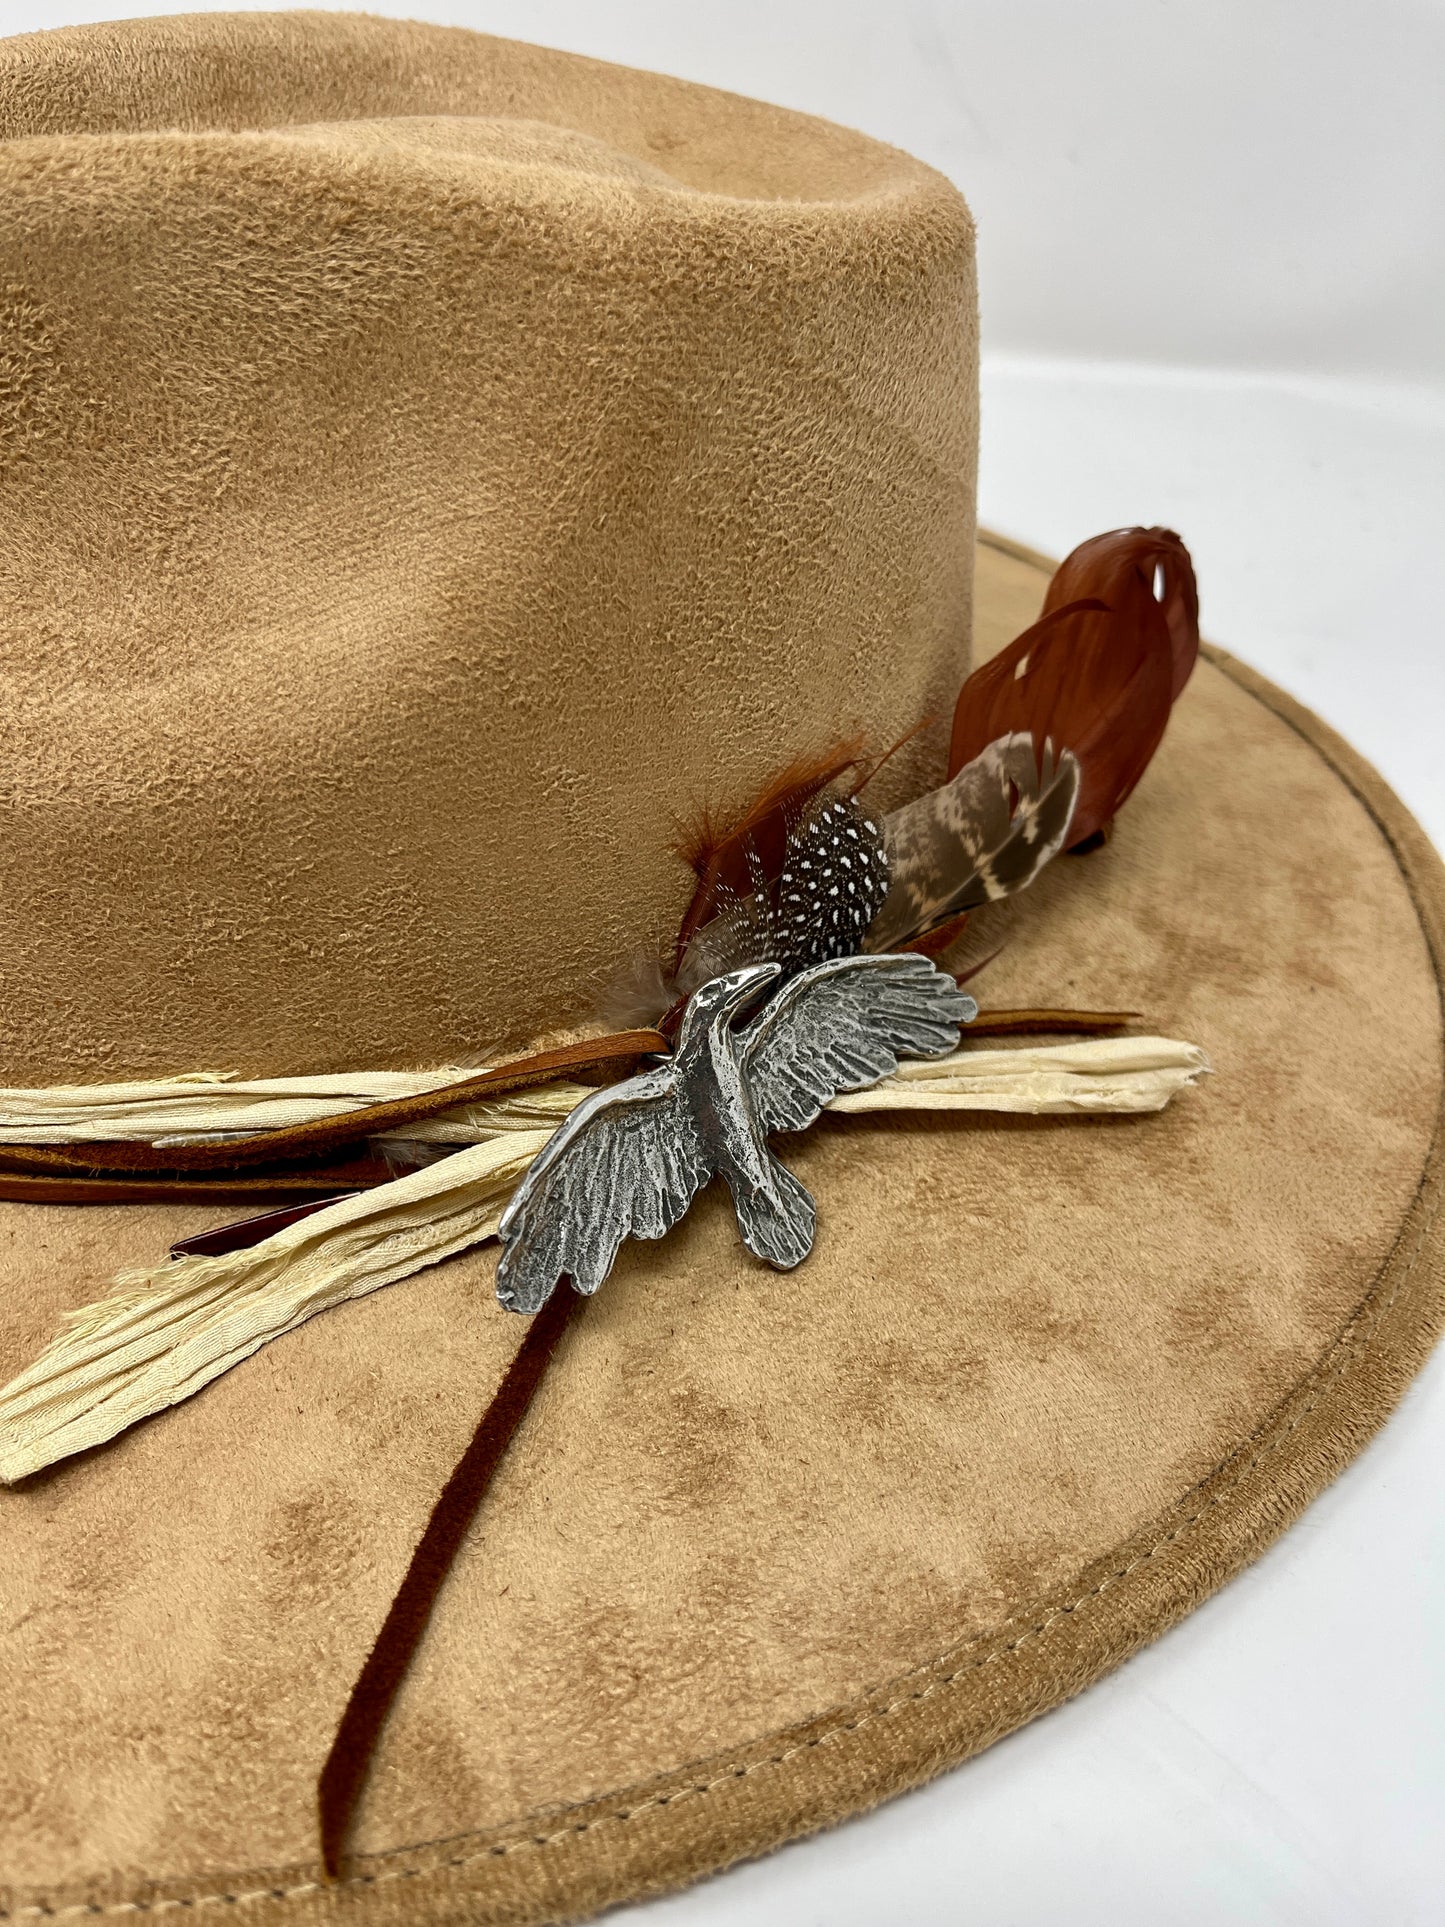 Rabbit Brush: Cowgirl Hats with Pewter Charms